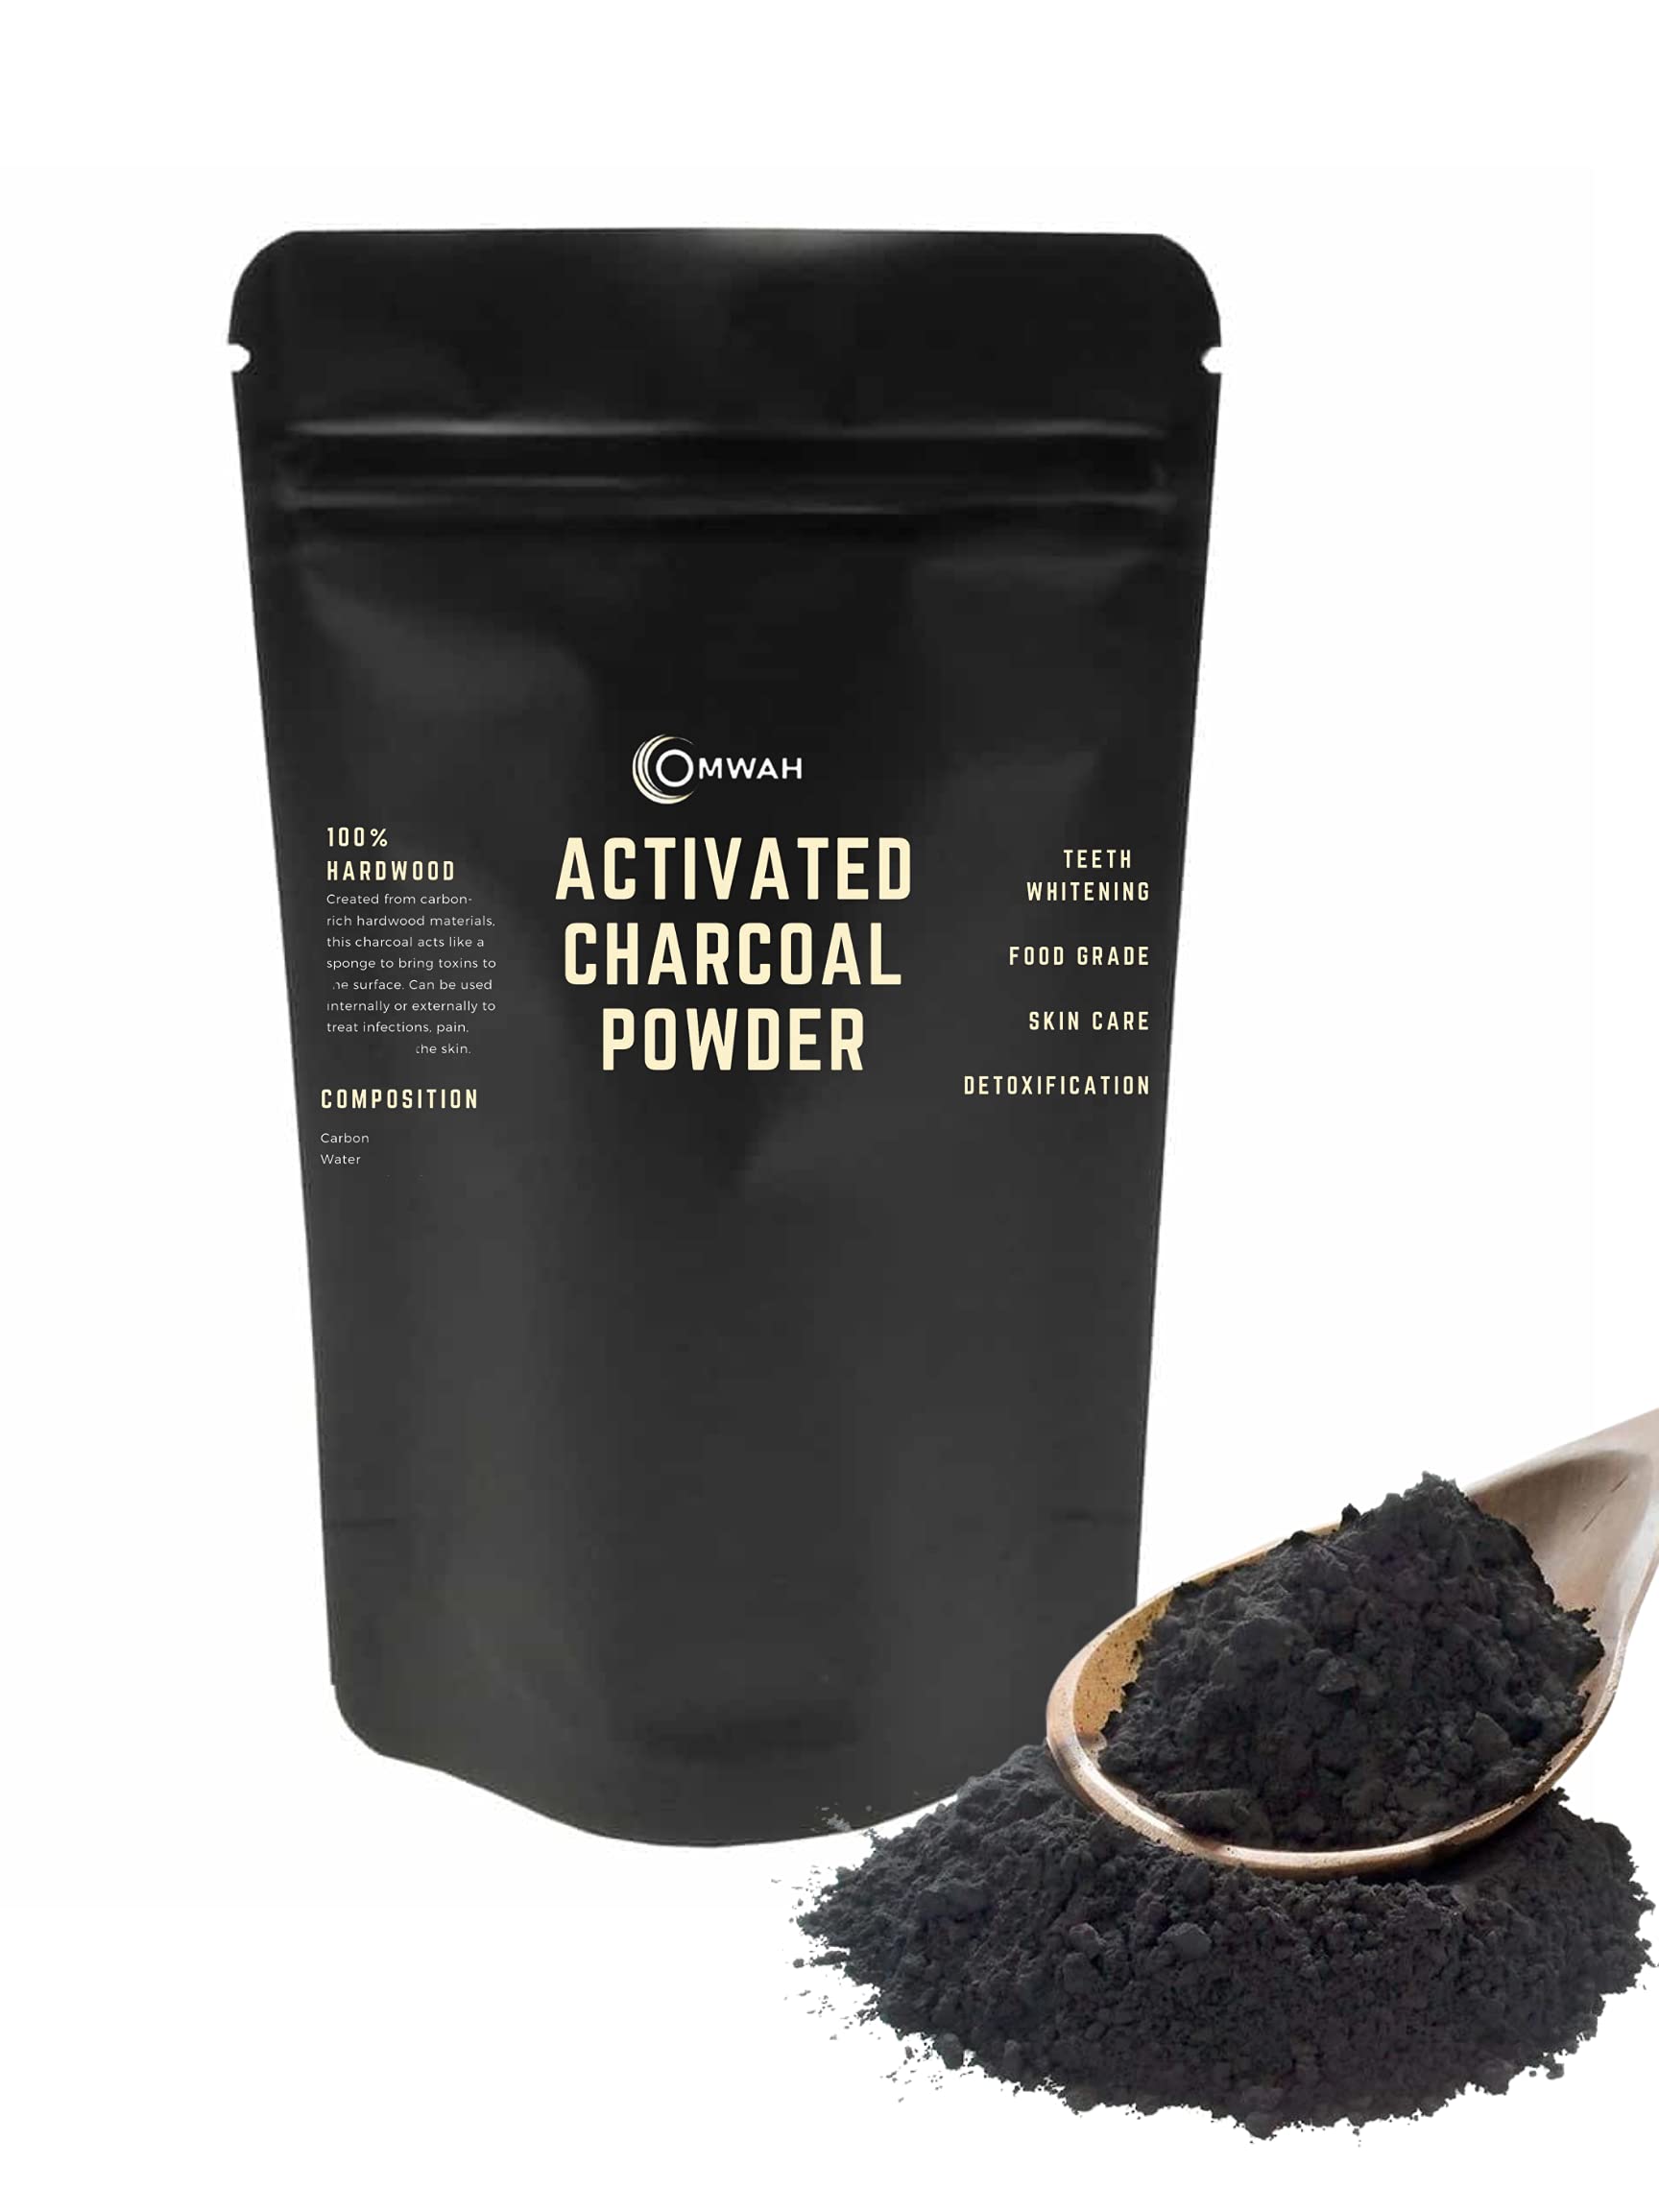 Charcoal House Hardwood Activated Charcoal Powder - Topical First Aid for  Cuts, Scratches, Minor Burns & More! Food Grade Powder for Nutrition, Body